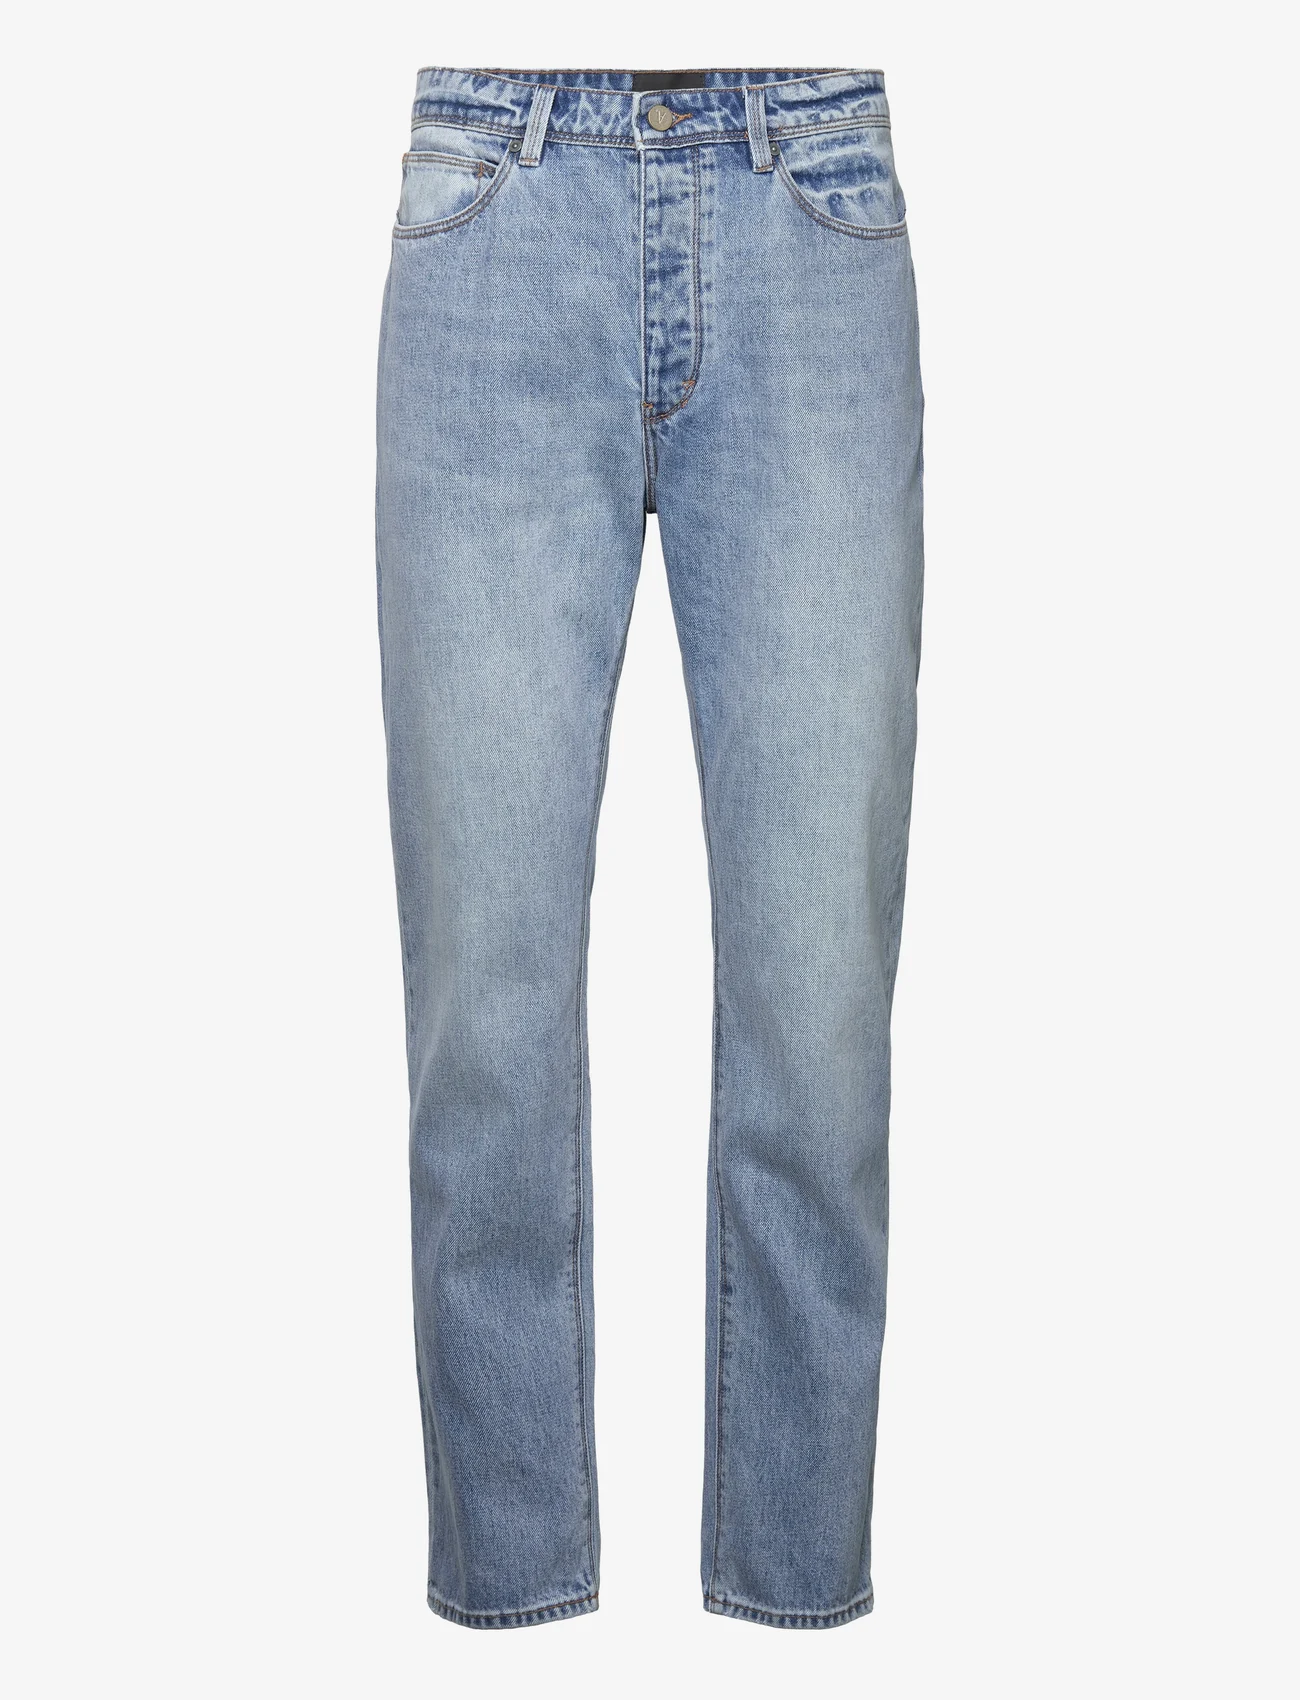 ABRAND - A 90s RELAXED OFFWORLD - loose jeans - blue - 0